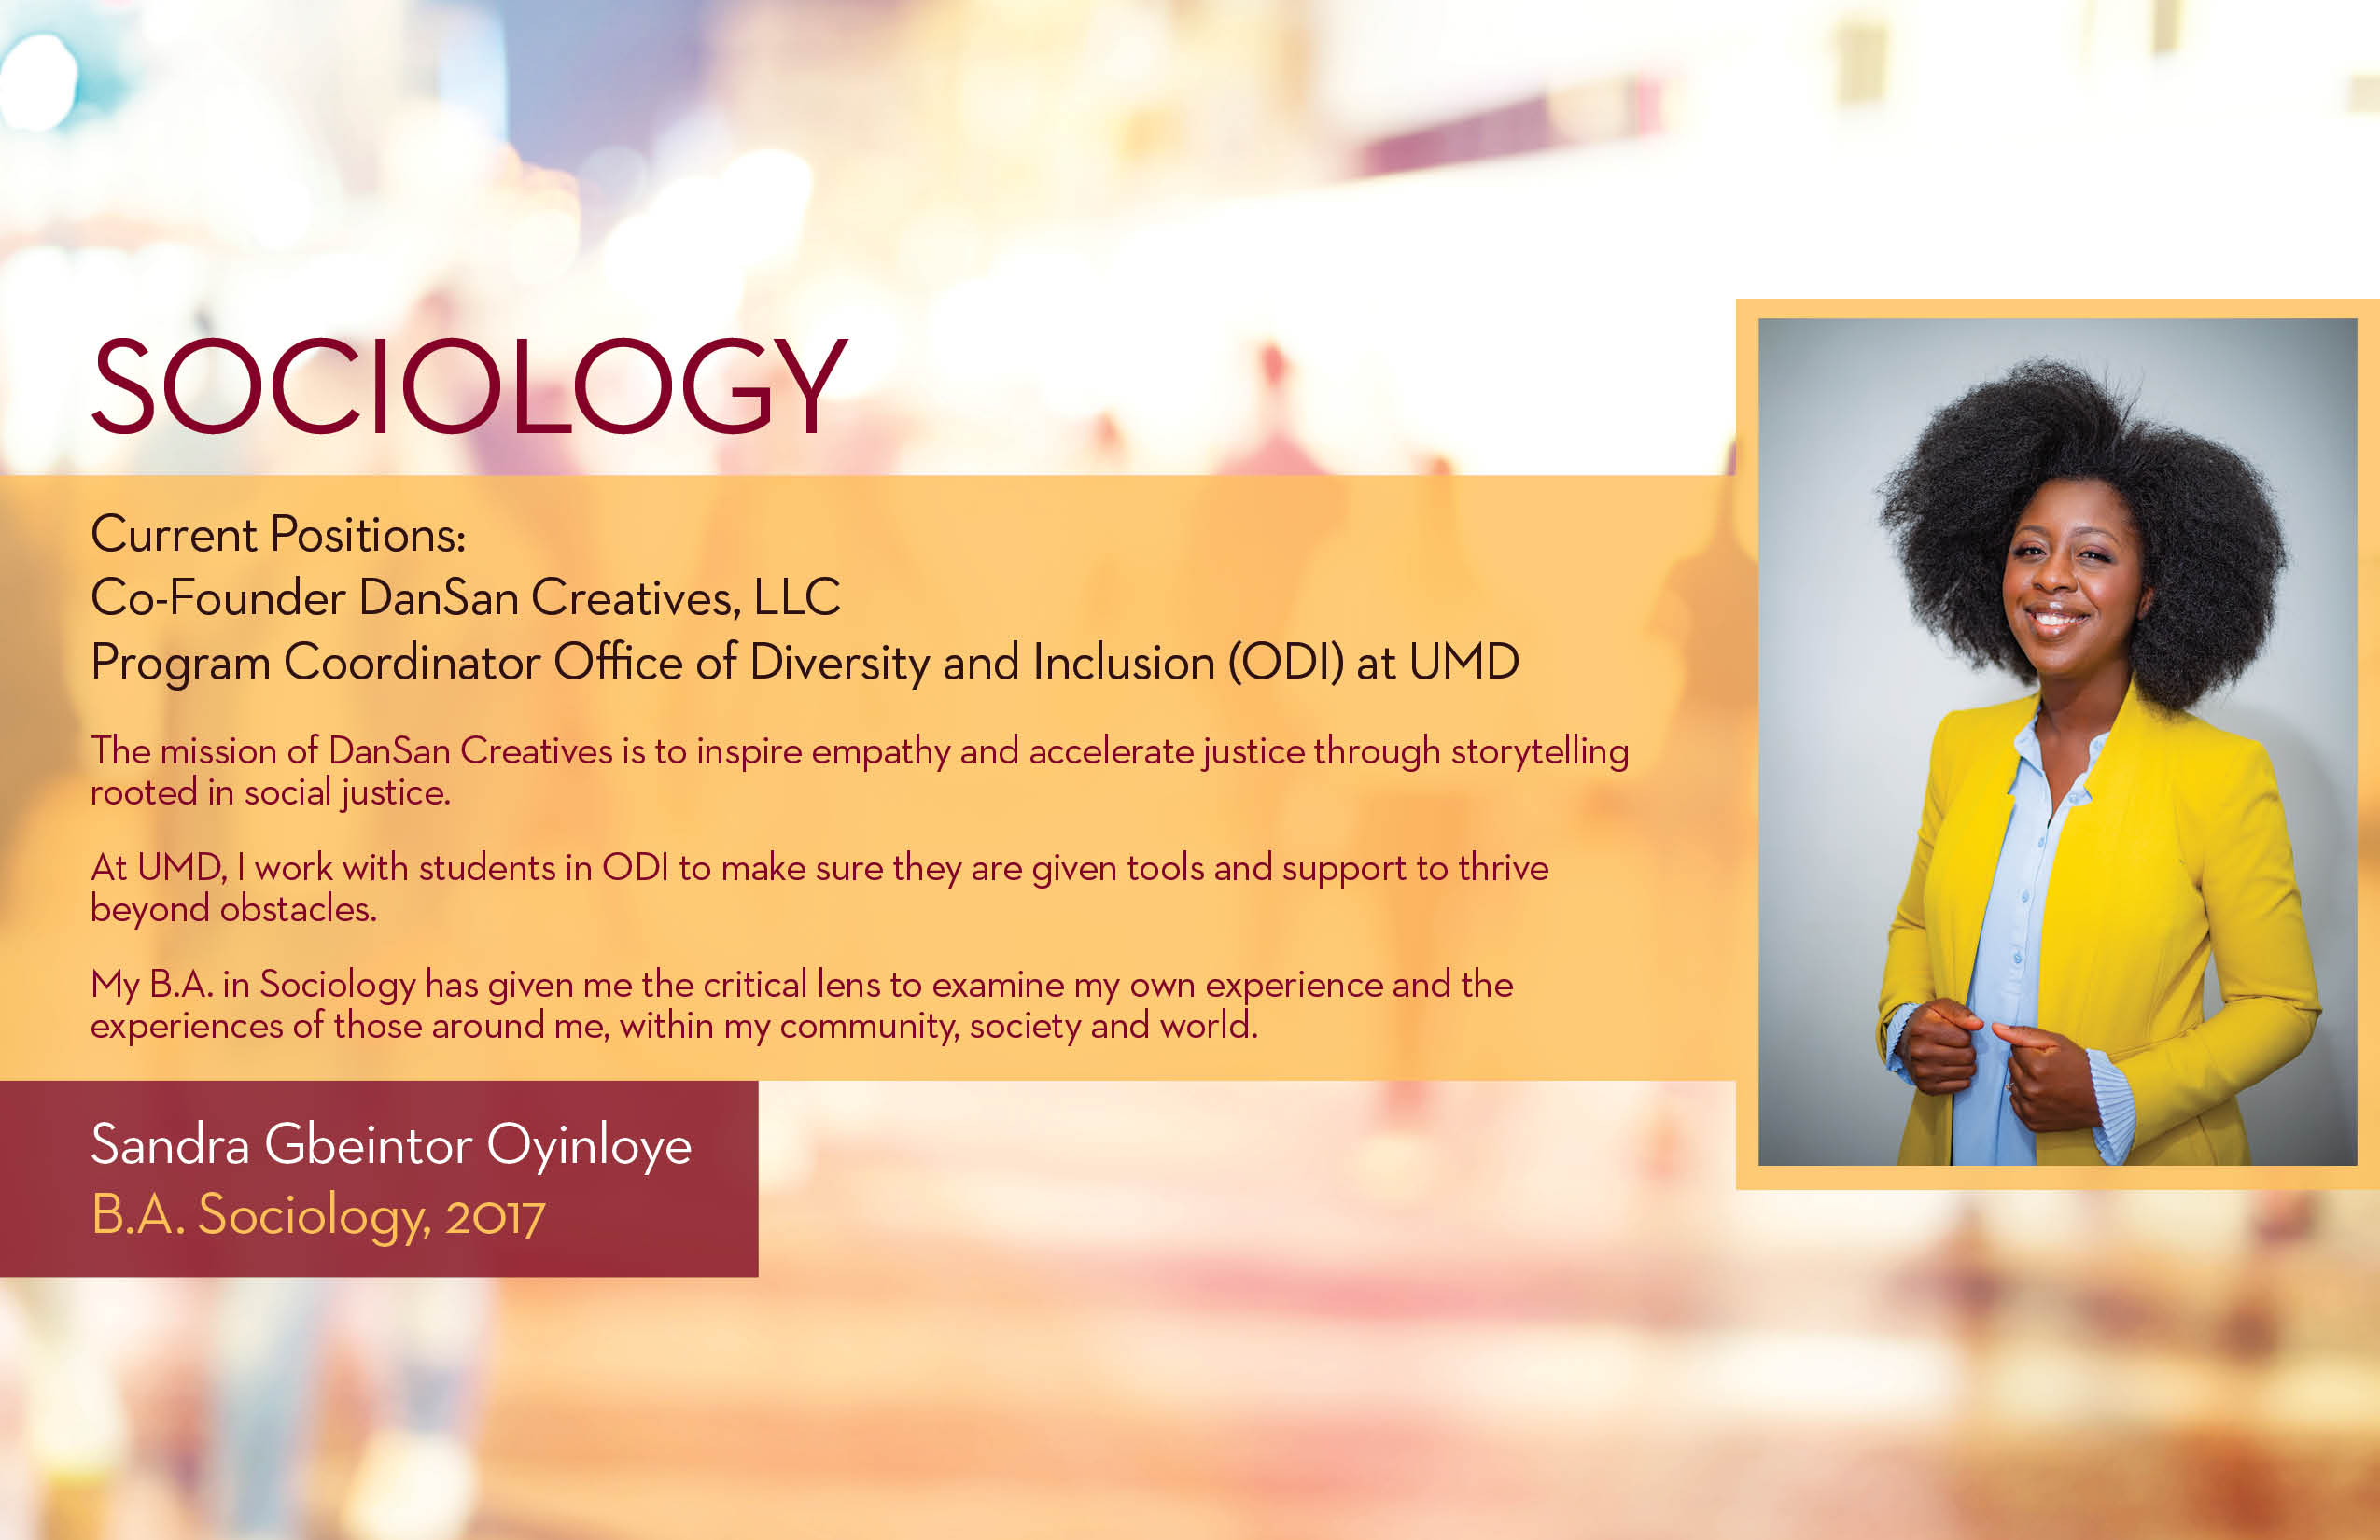 blurred background with gold text box with Maroon text and a photo of Sandra Gbeintor Oyinloye